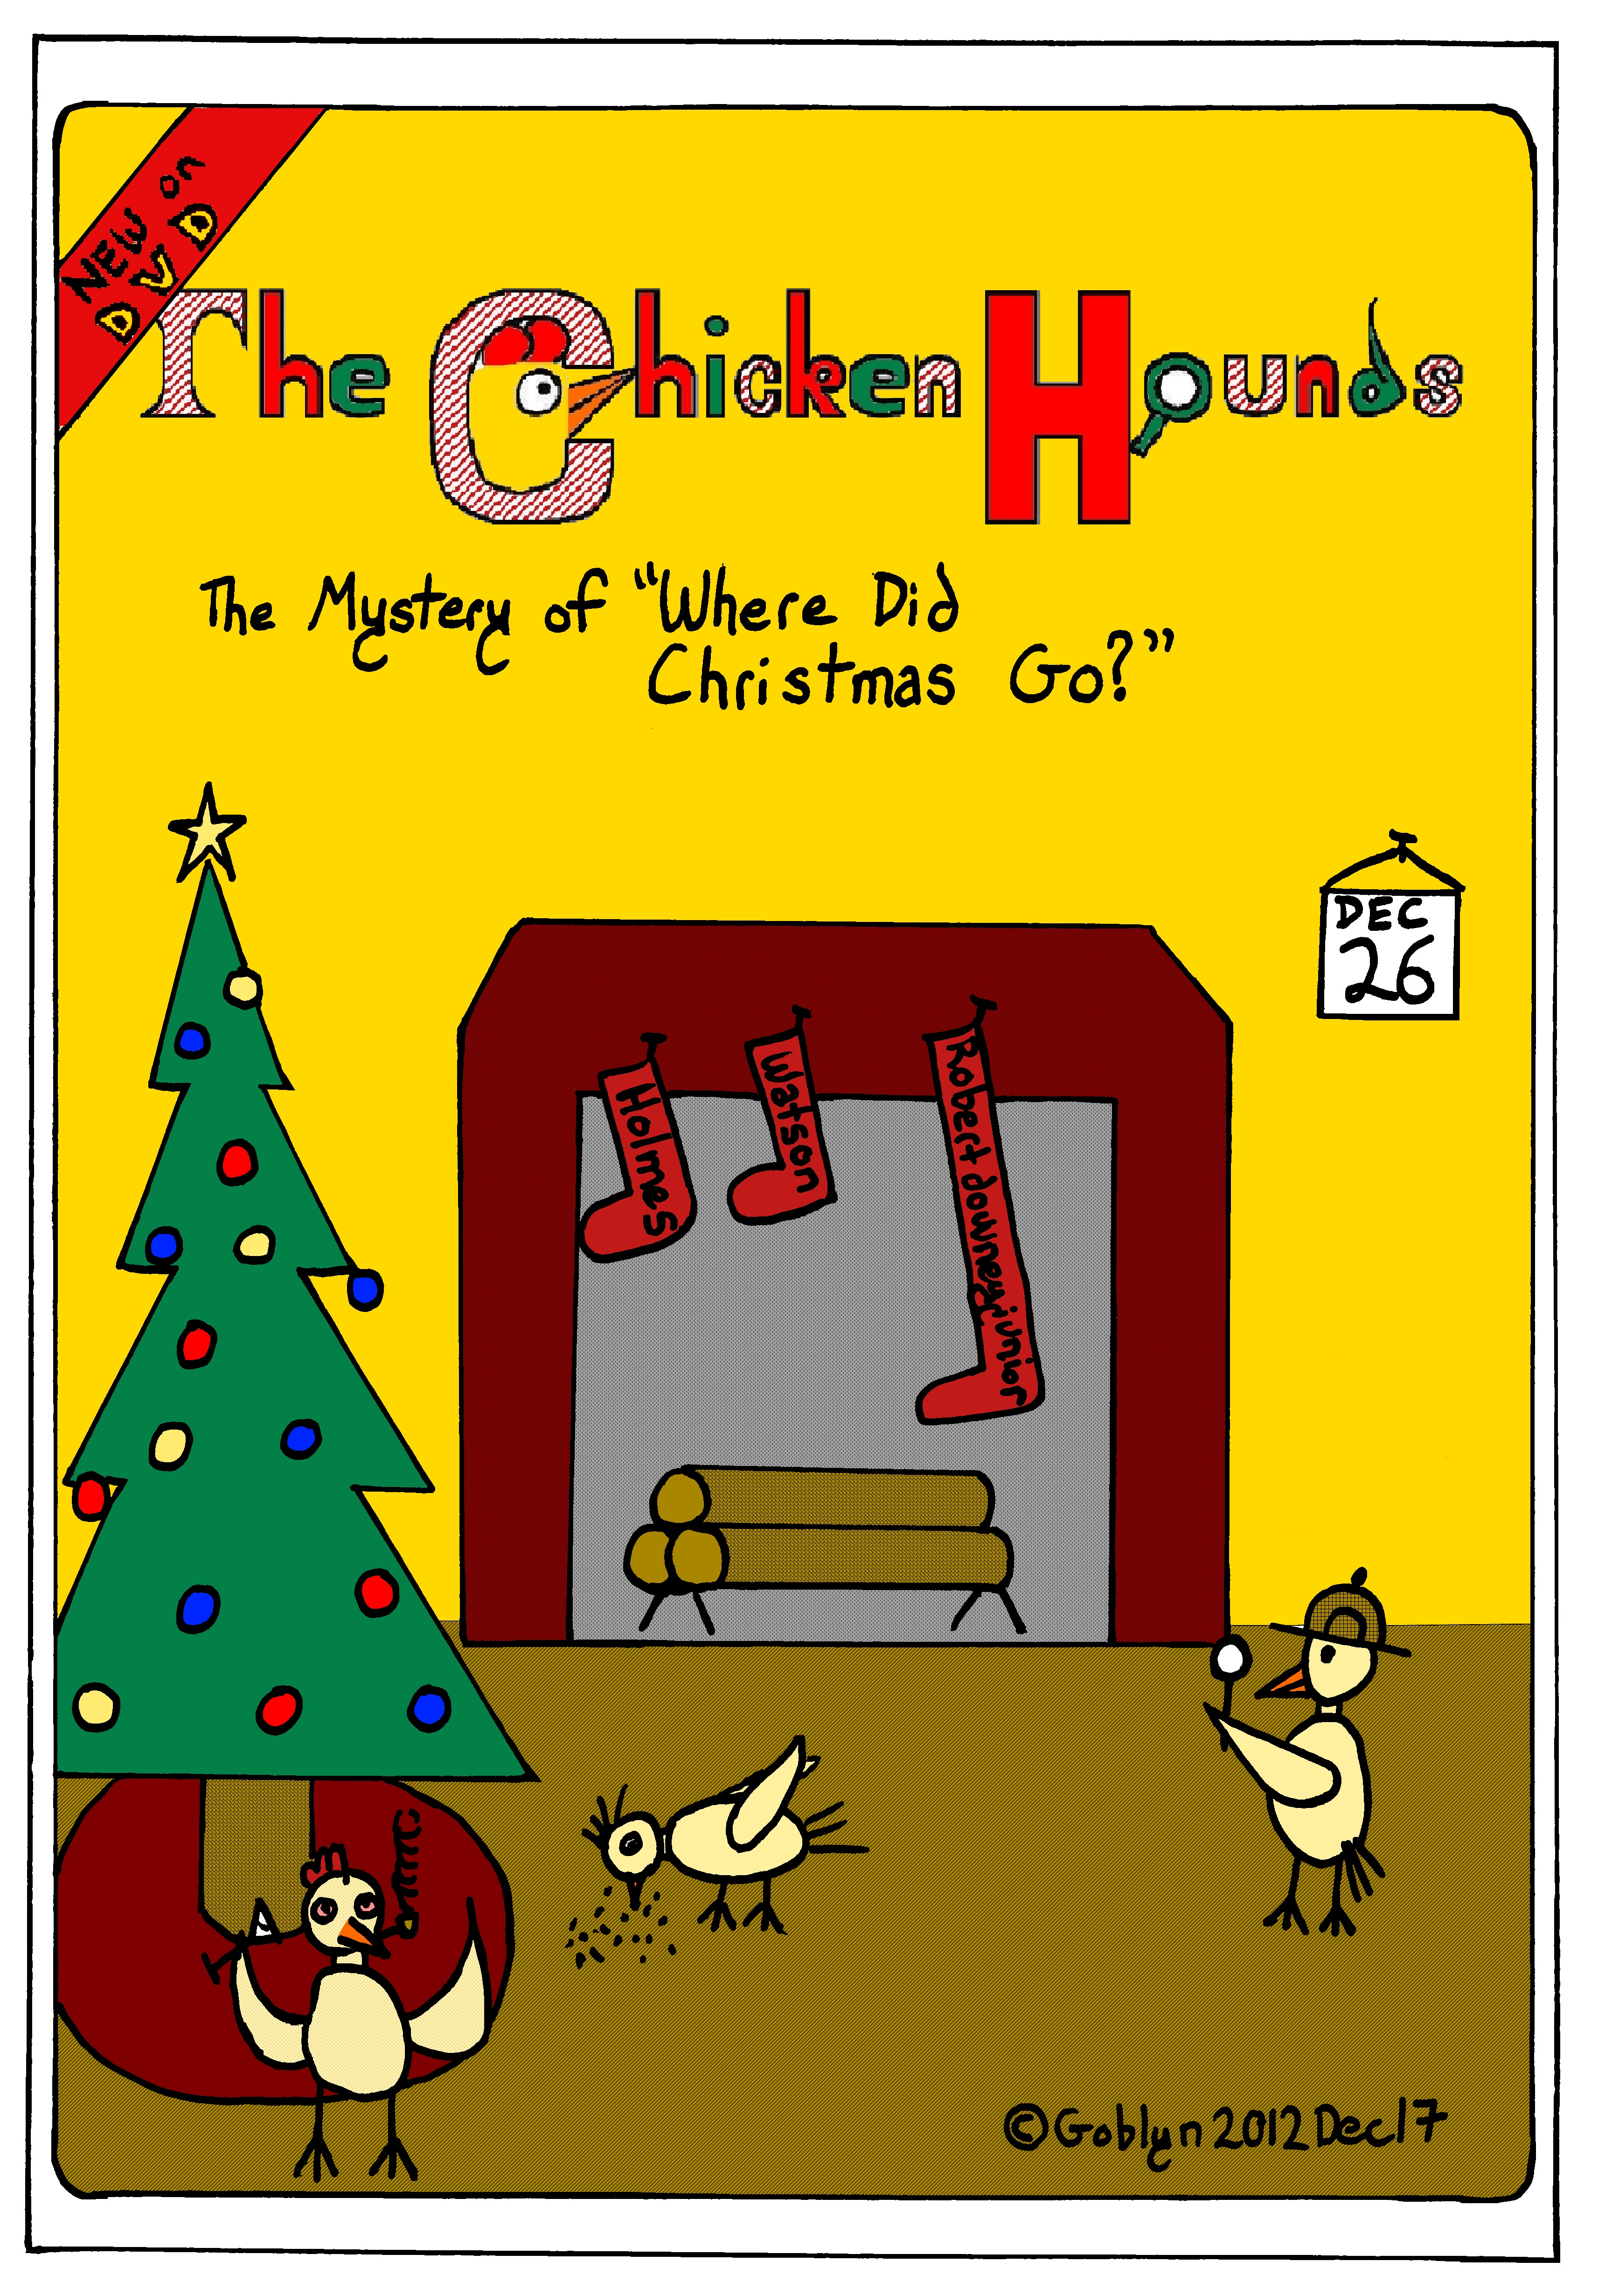 The Chicken Hounds in "The Mystery of Where Did Christmas Go?"